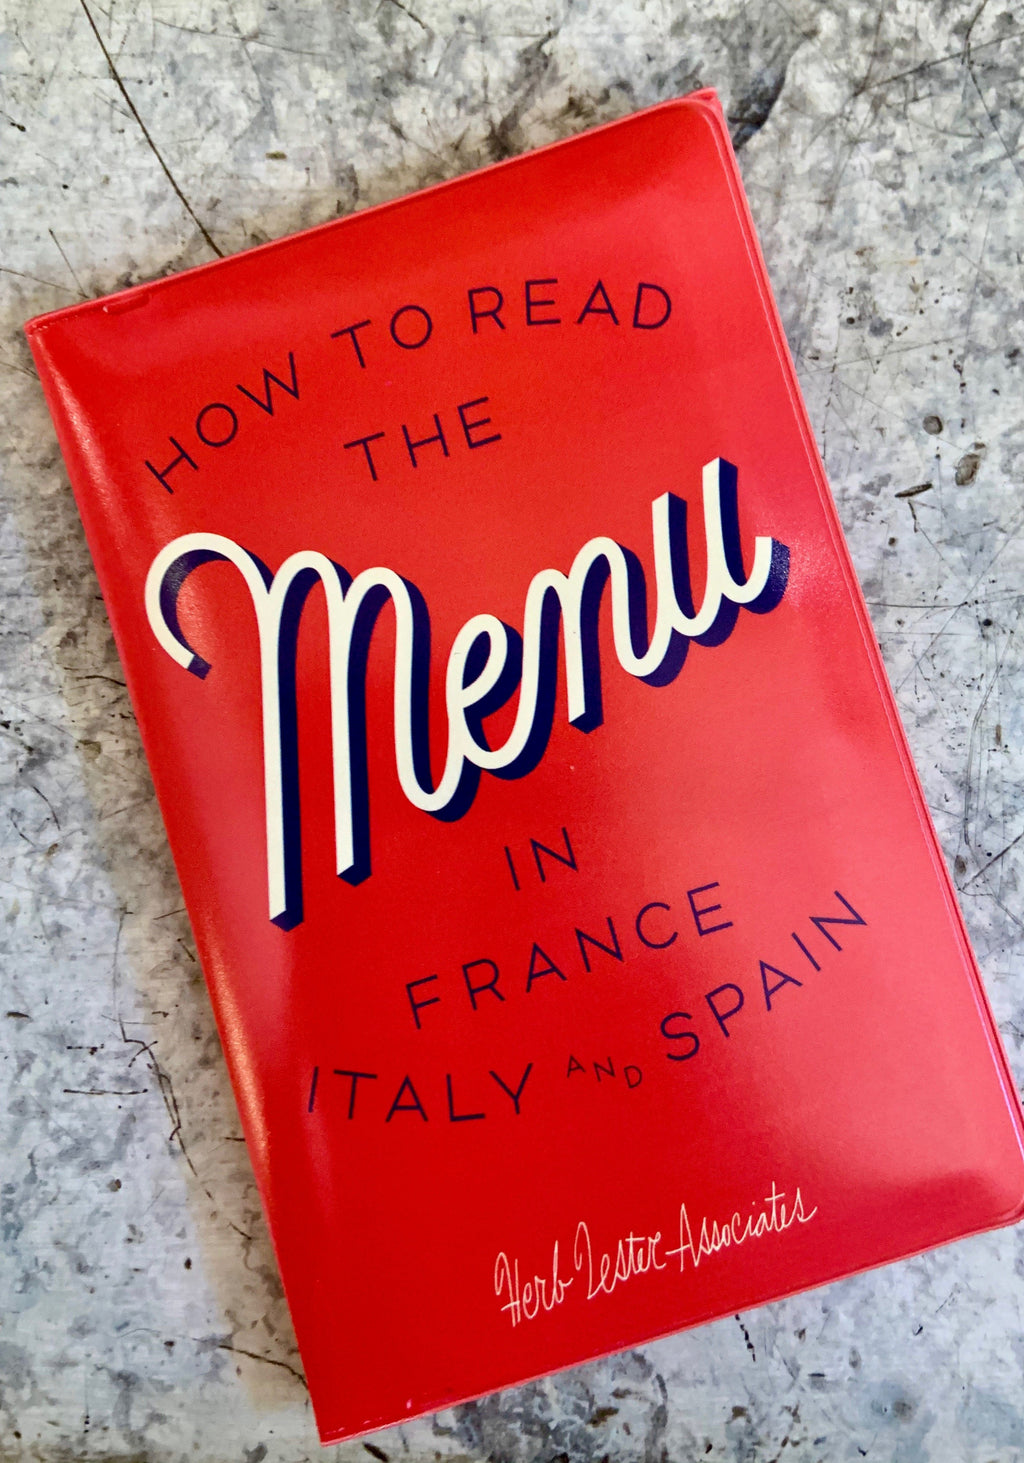 How to Read the Menu in France, Italy, and Spain